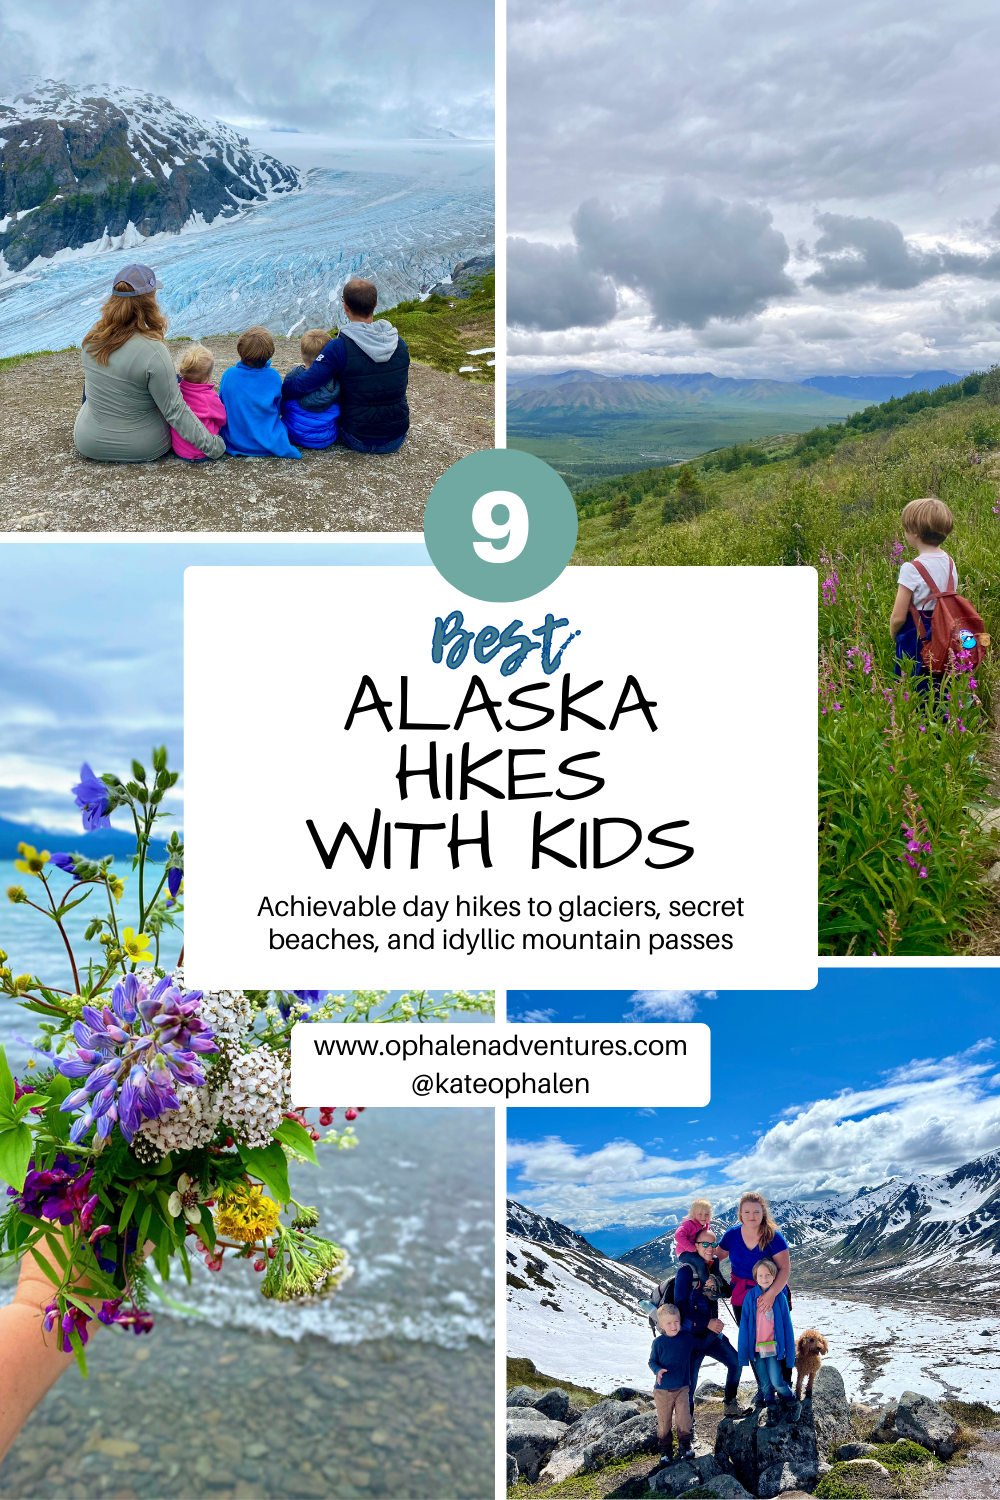 9 Best Alaska Hikes with Kids | Achievable day hikes to glaciers, secret beaches, and idyllic mountain passes